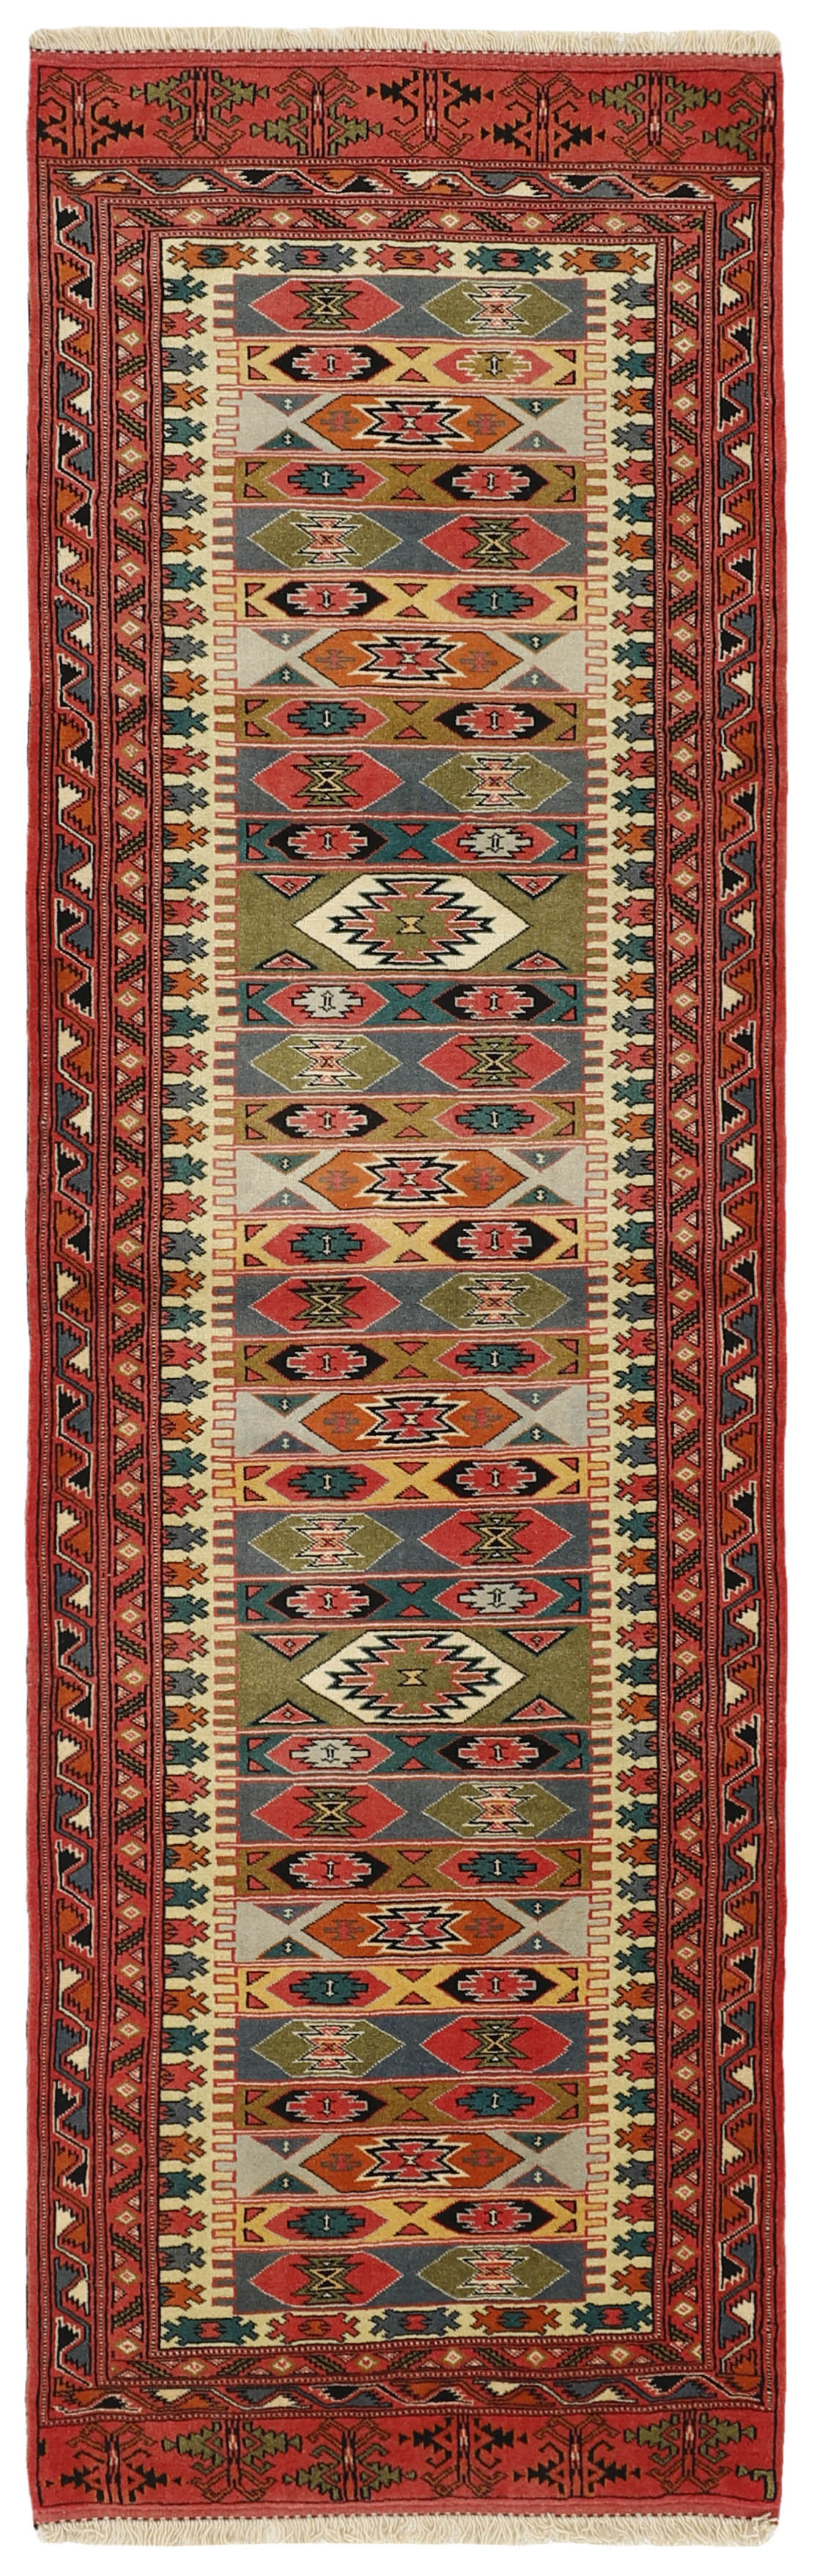 authentic red, blue and black persian runner